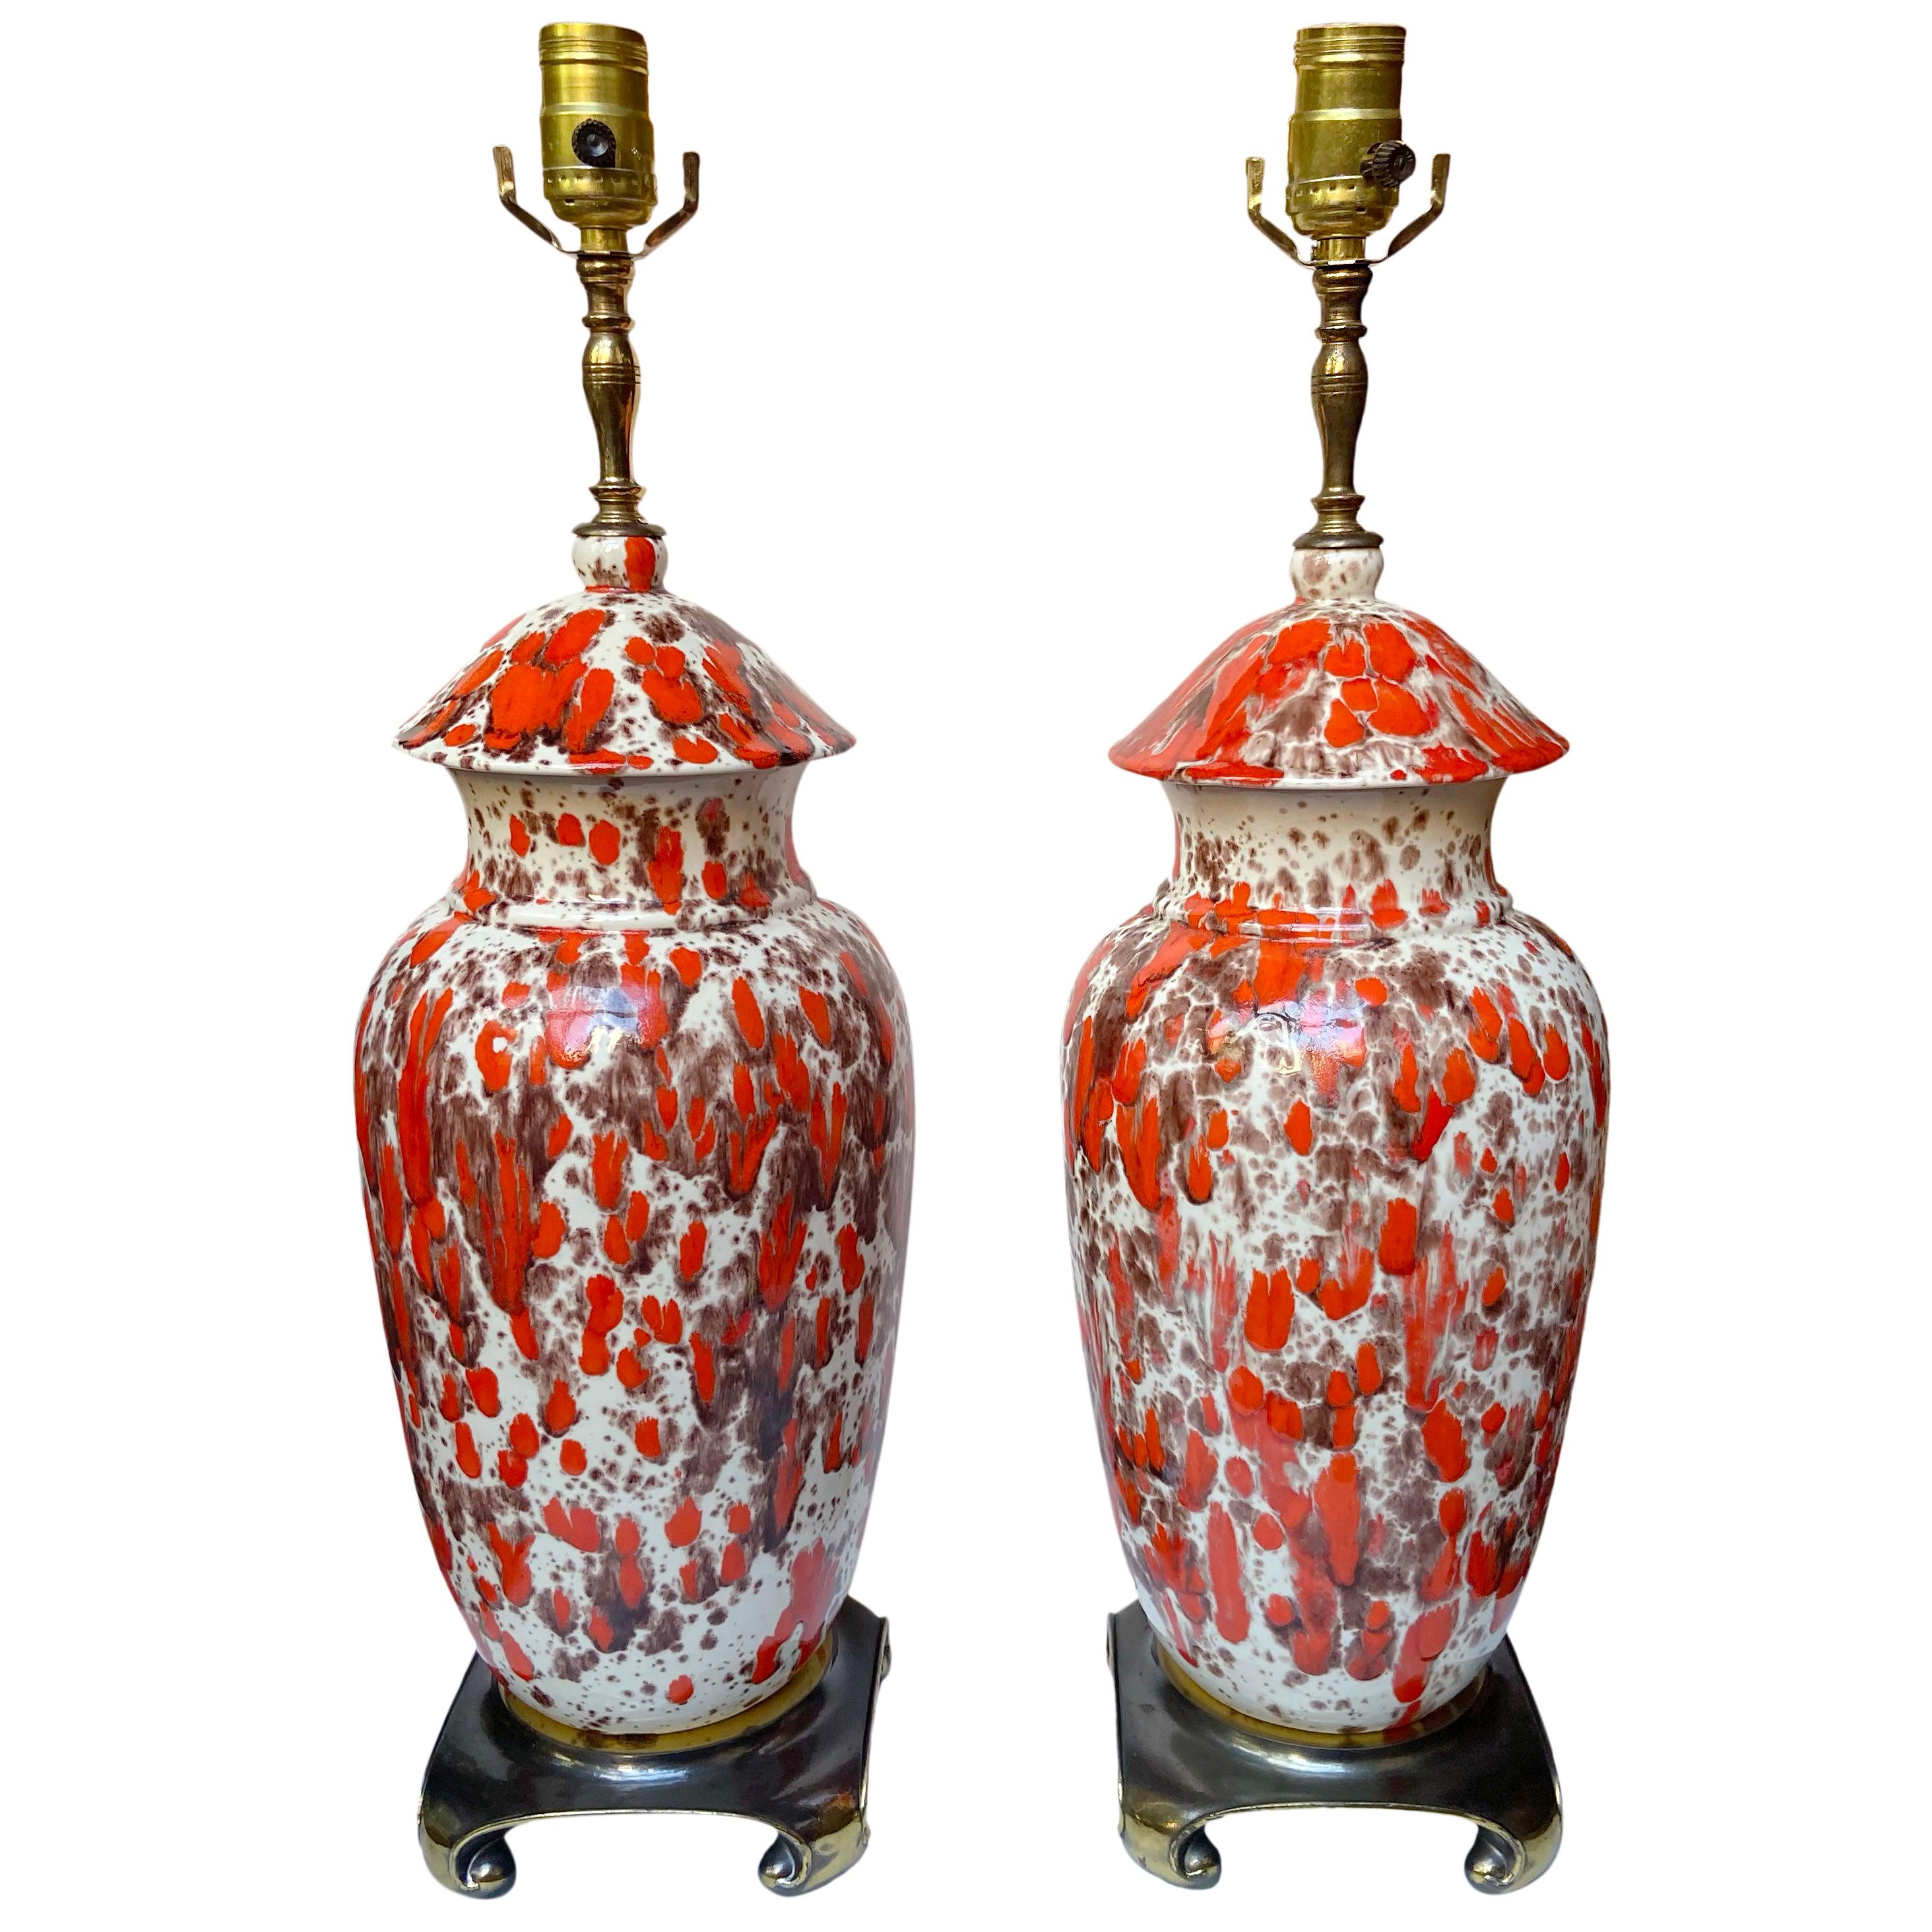 Pair of White and Orange Porcelain Lamps For Sale